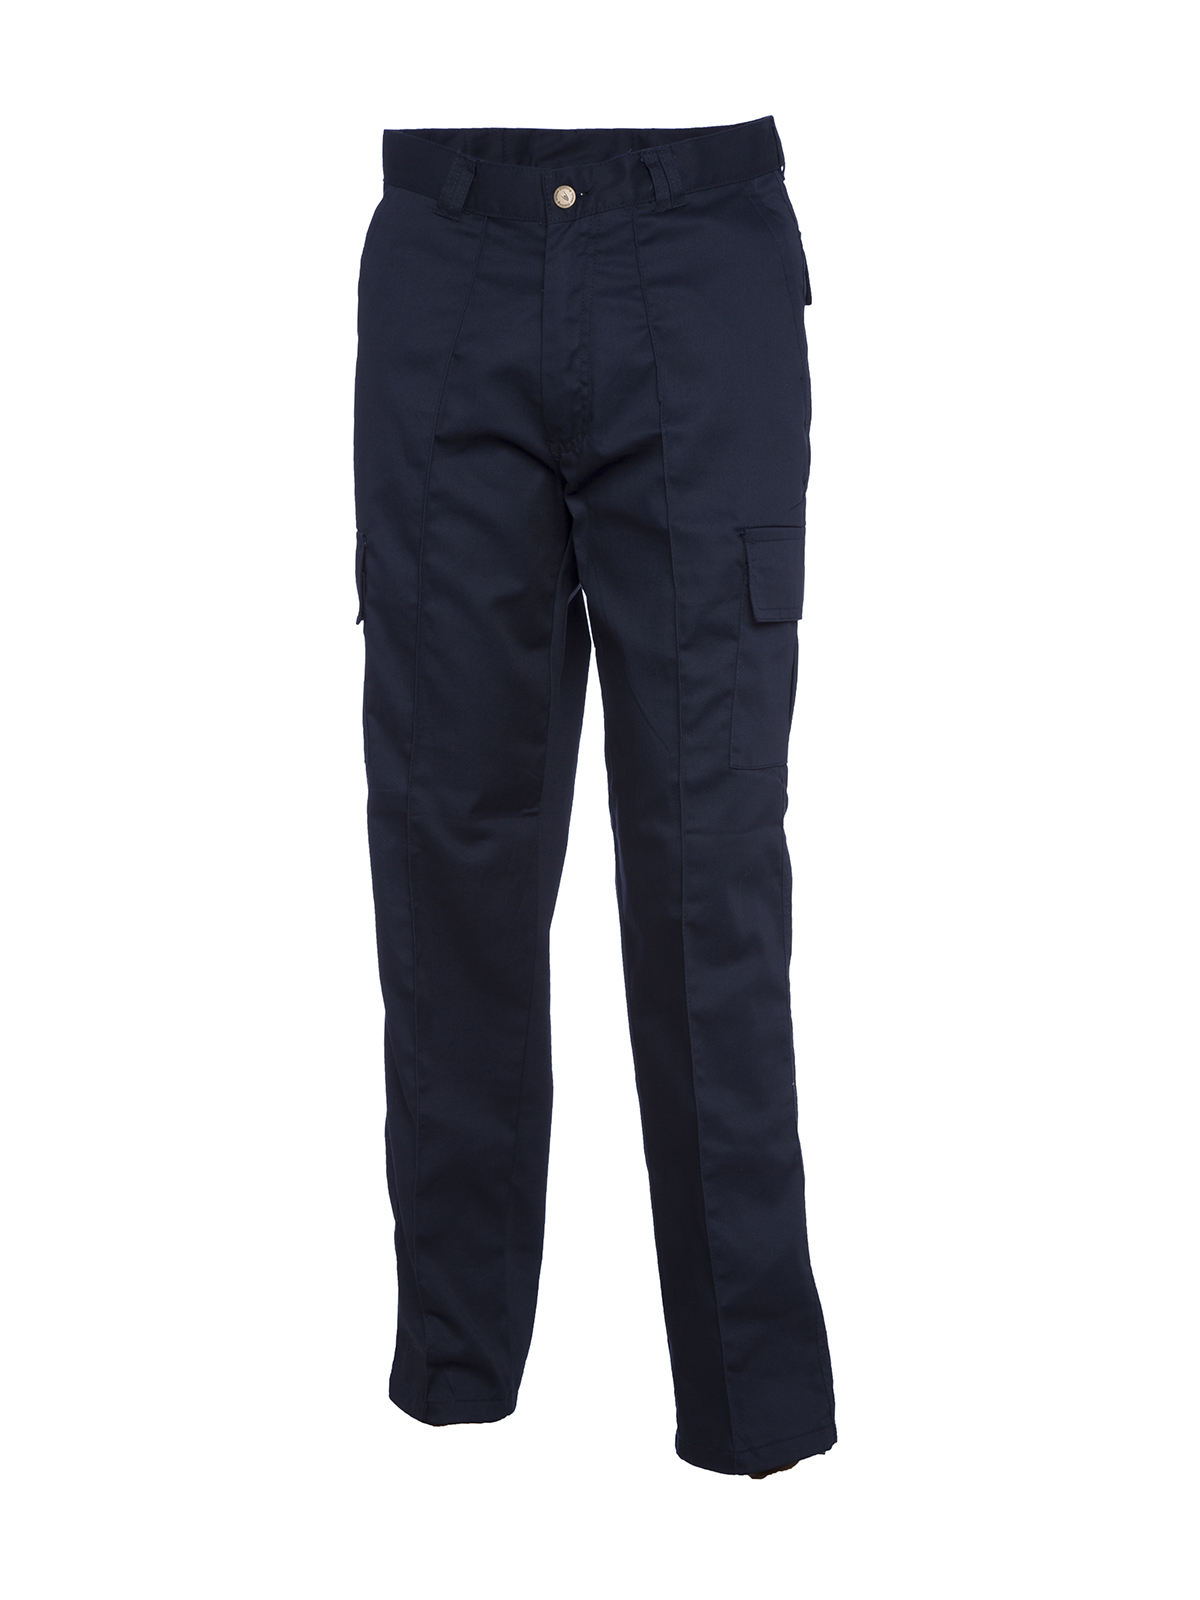 Cargo Trousers, Navy Blue - 28L